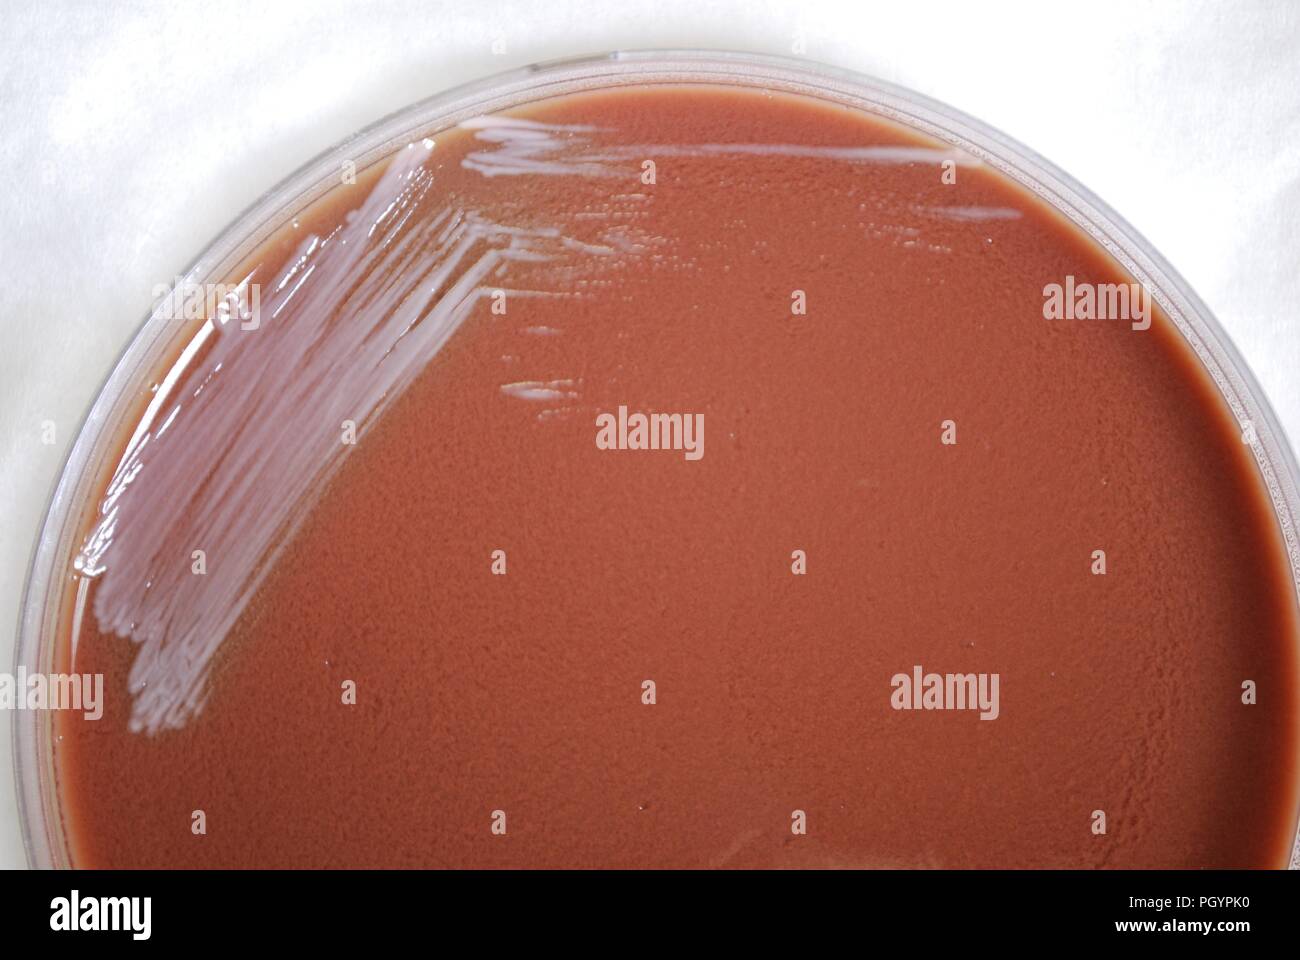 Colonial morphology of Gram-negative Burkholderia mallei bacteria grown 24 hours on a medium of chocolate agar, 2010. Image courtesy Centers for Disease Control (CDC) / Dr Todd Parker, Audra Marsh. () Stock Photo